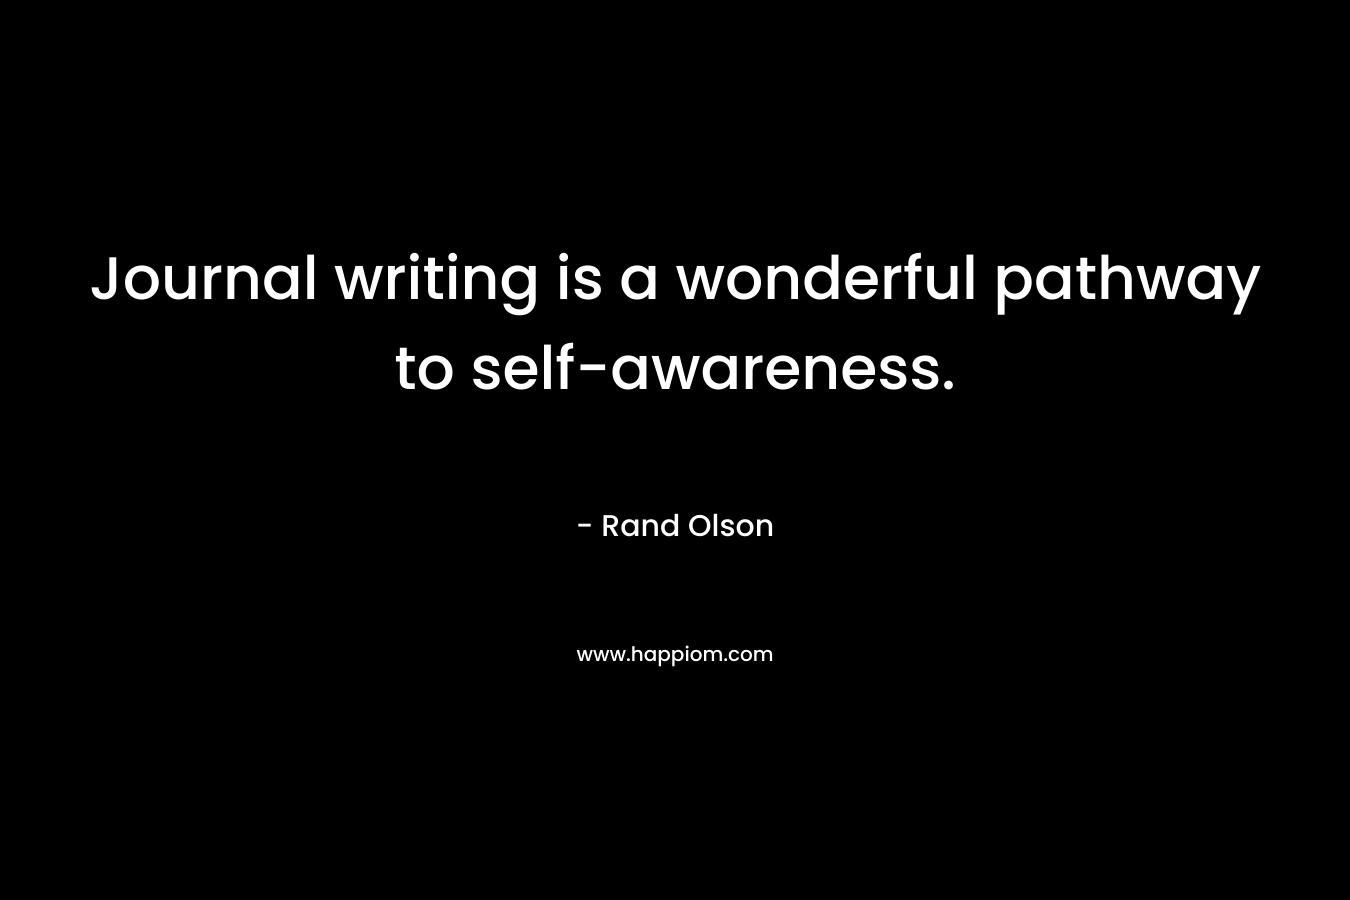 Journal writing is a wonderful pathway to self-awareness.